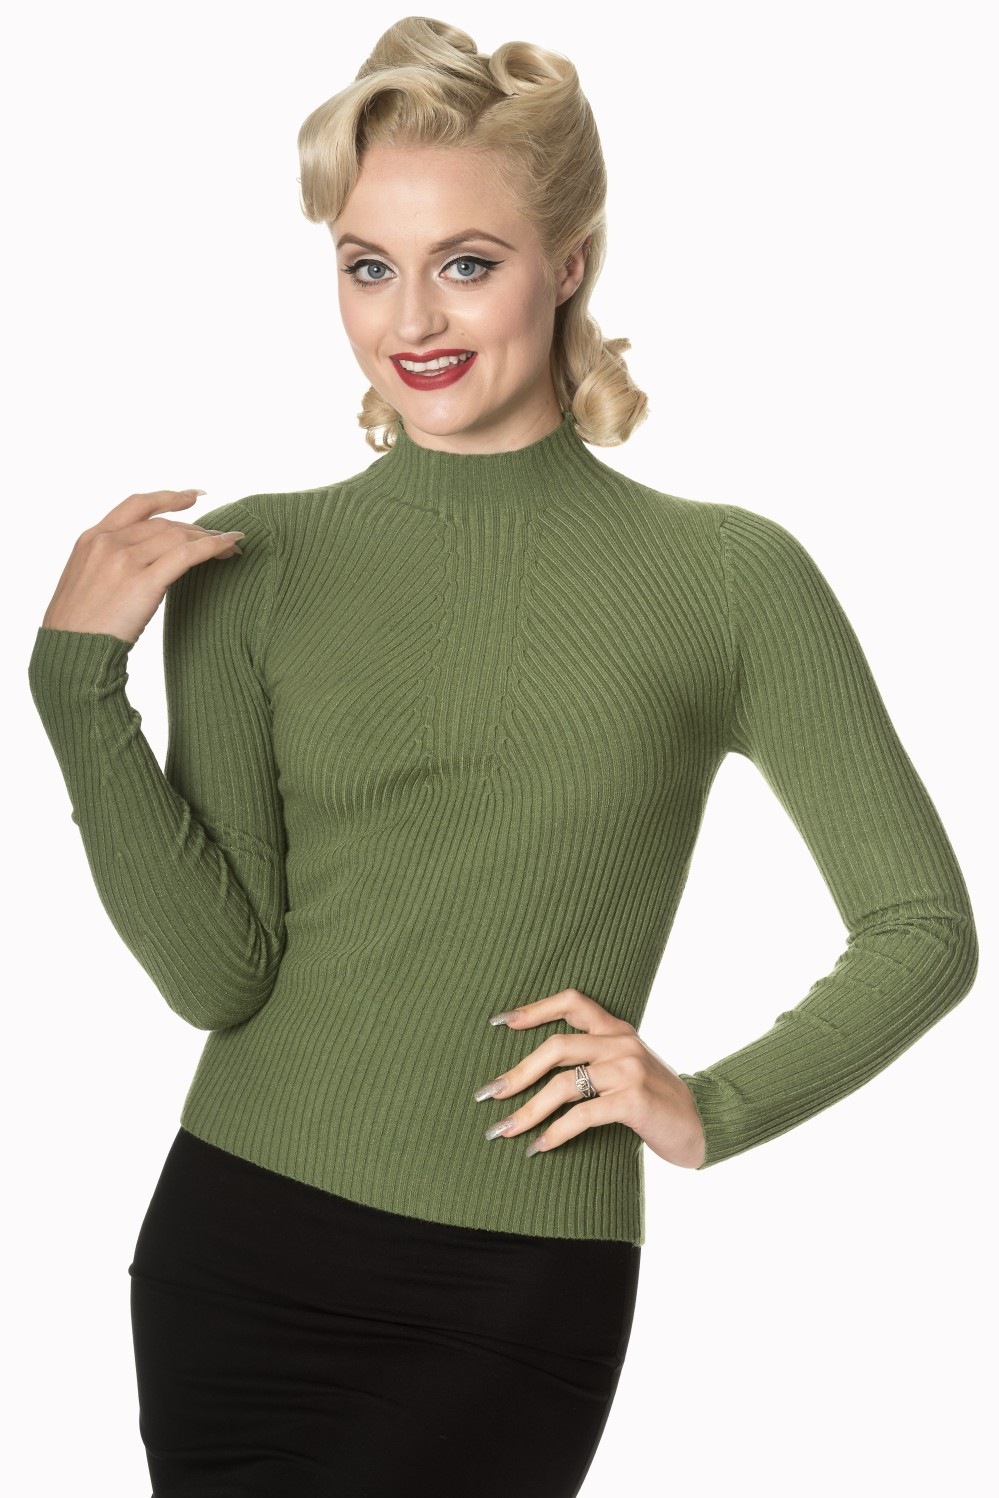 BNJP1522OLI_pull-banned-pin-up-retro-50-s-olive